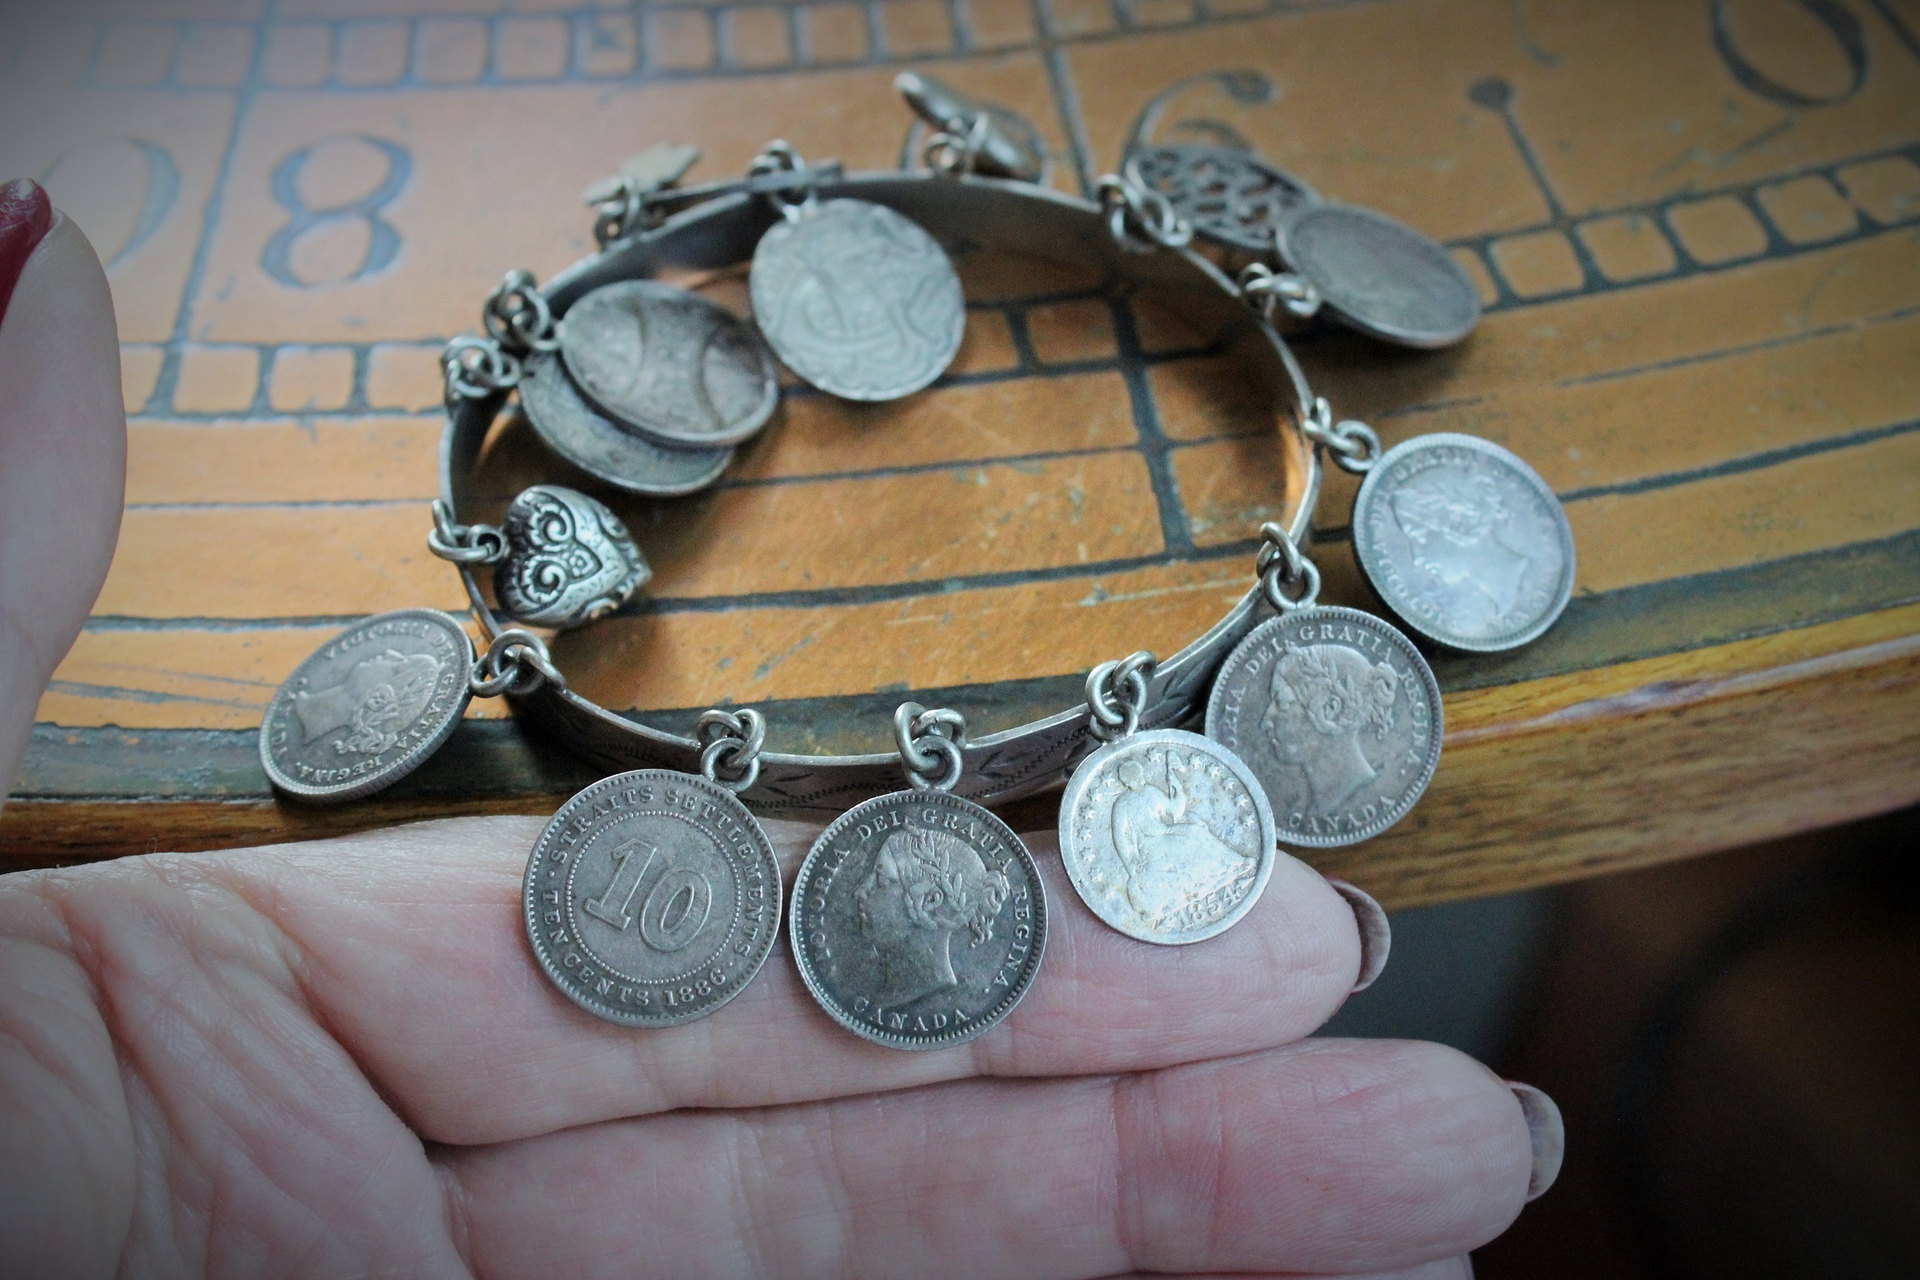 NEW! Incredible Antique Victorian Love Token Bracelet Set of 3 - Amazing Variety of1800's Coin Size & Type, Monograms and Dangles!